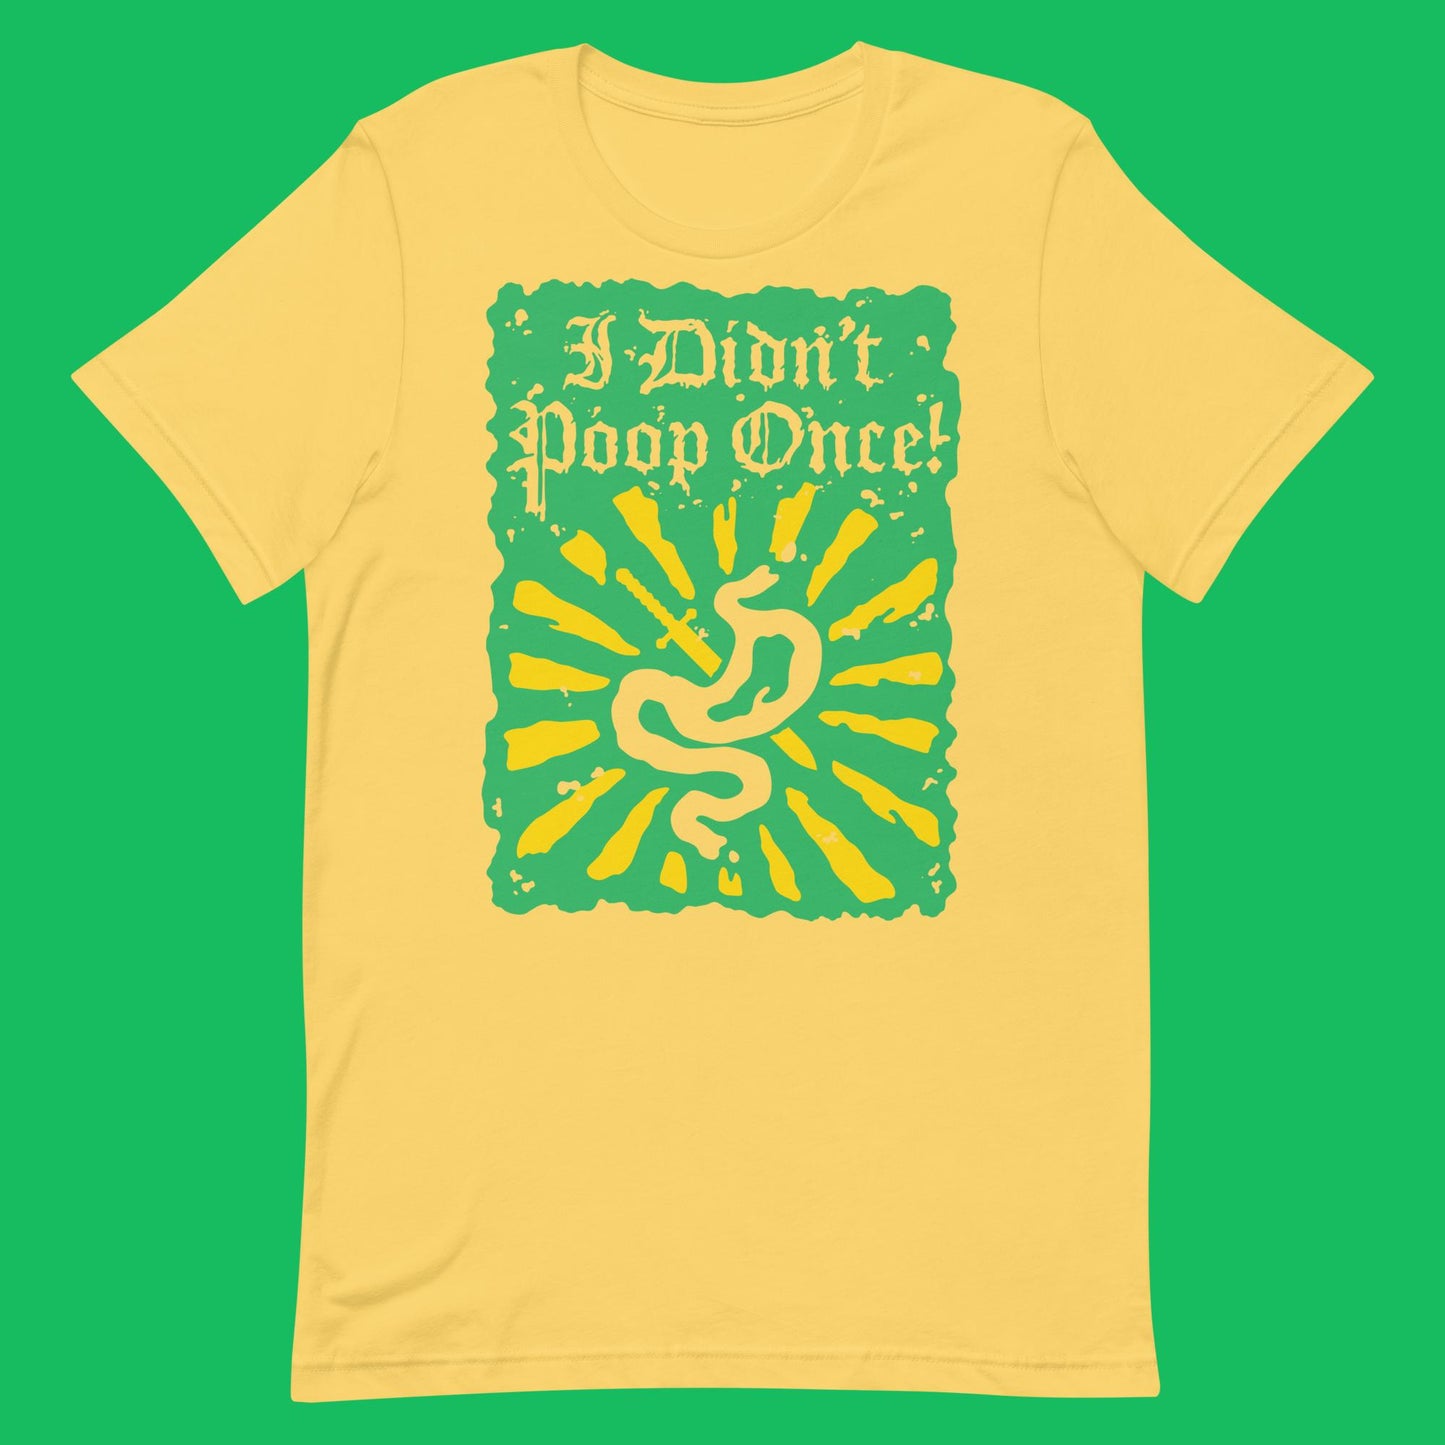 I Didn't Poop Once! - Unisex t-shirt